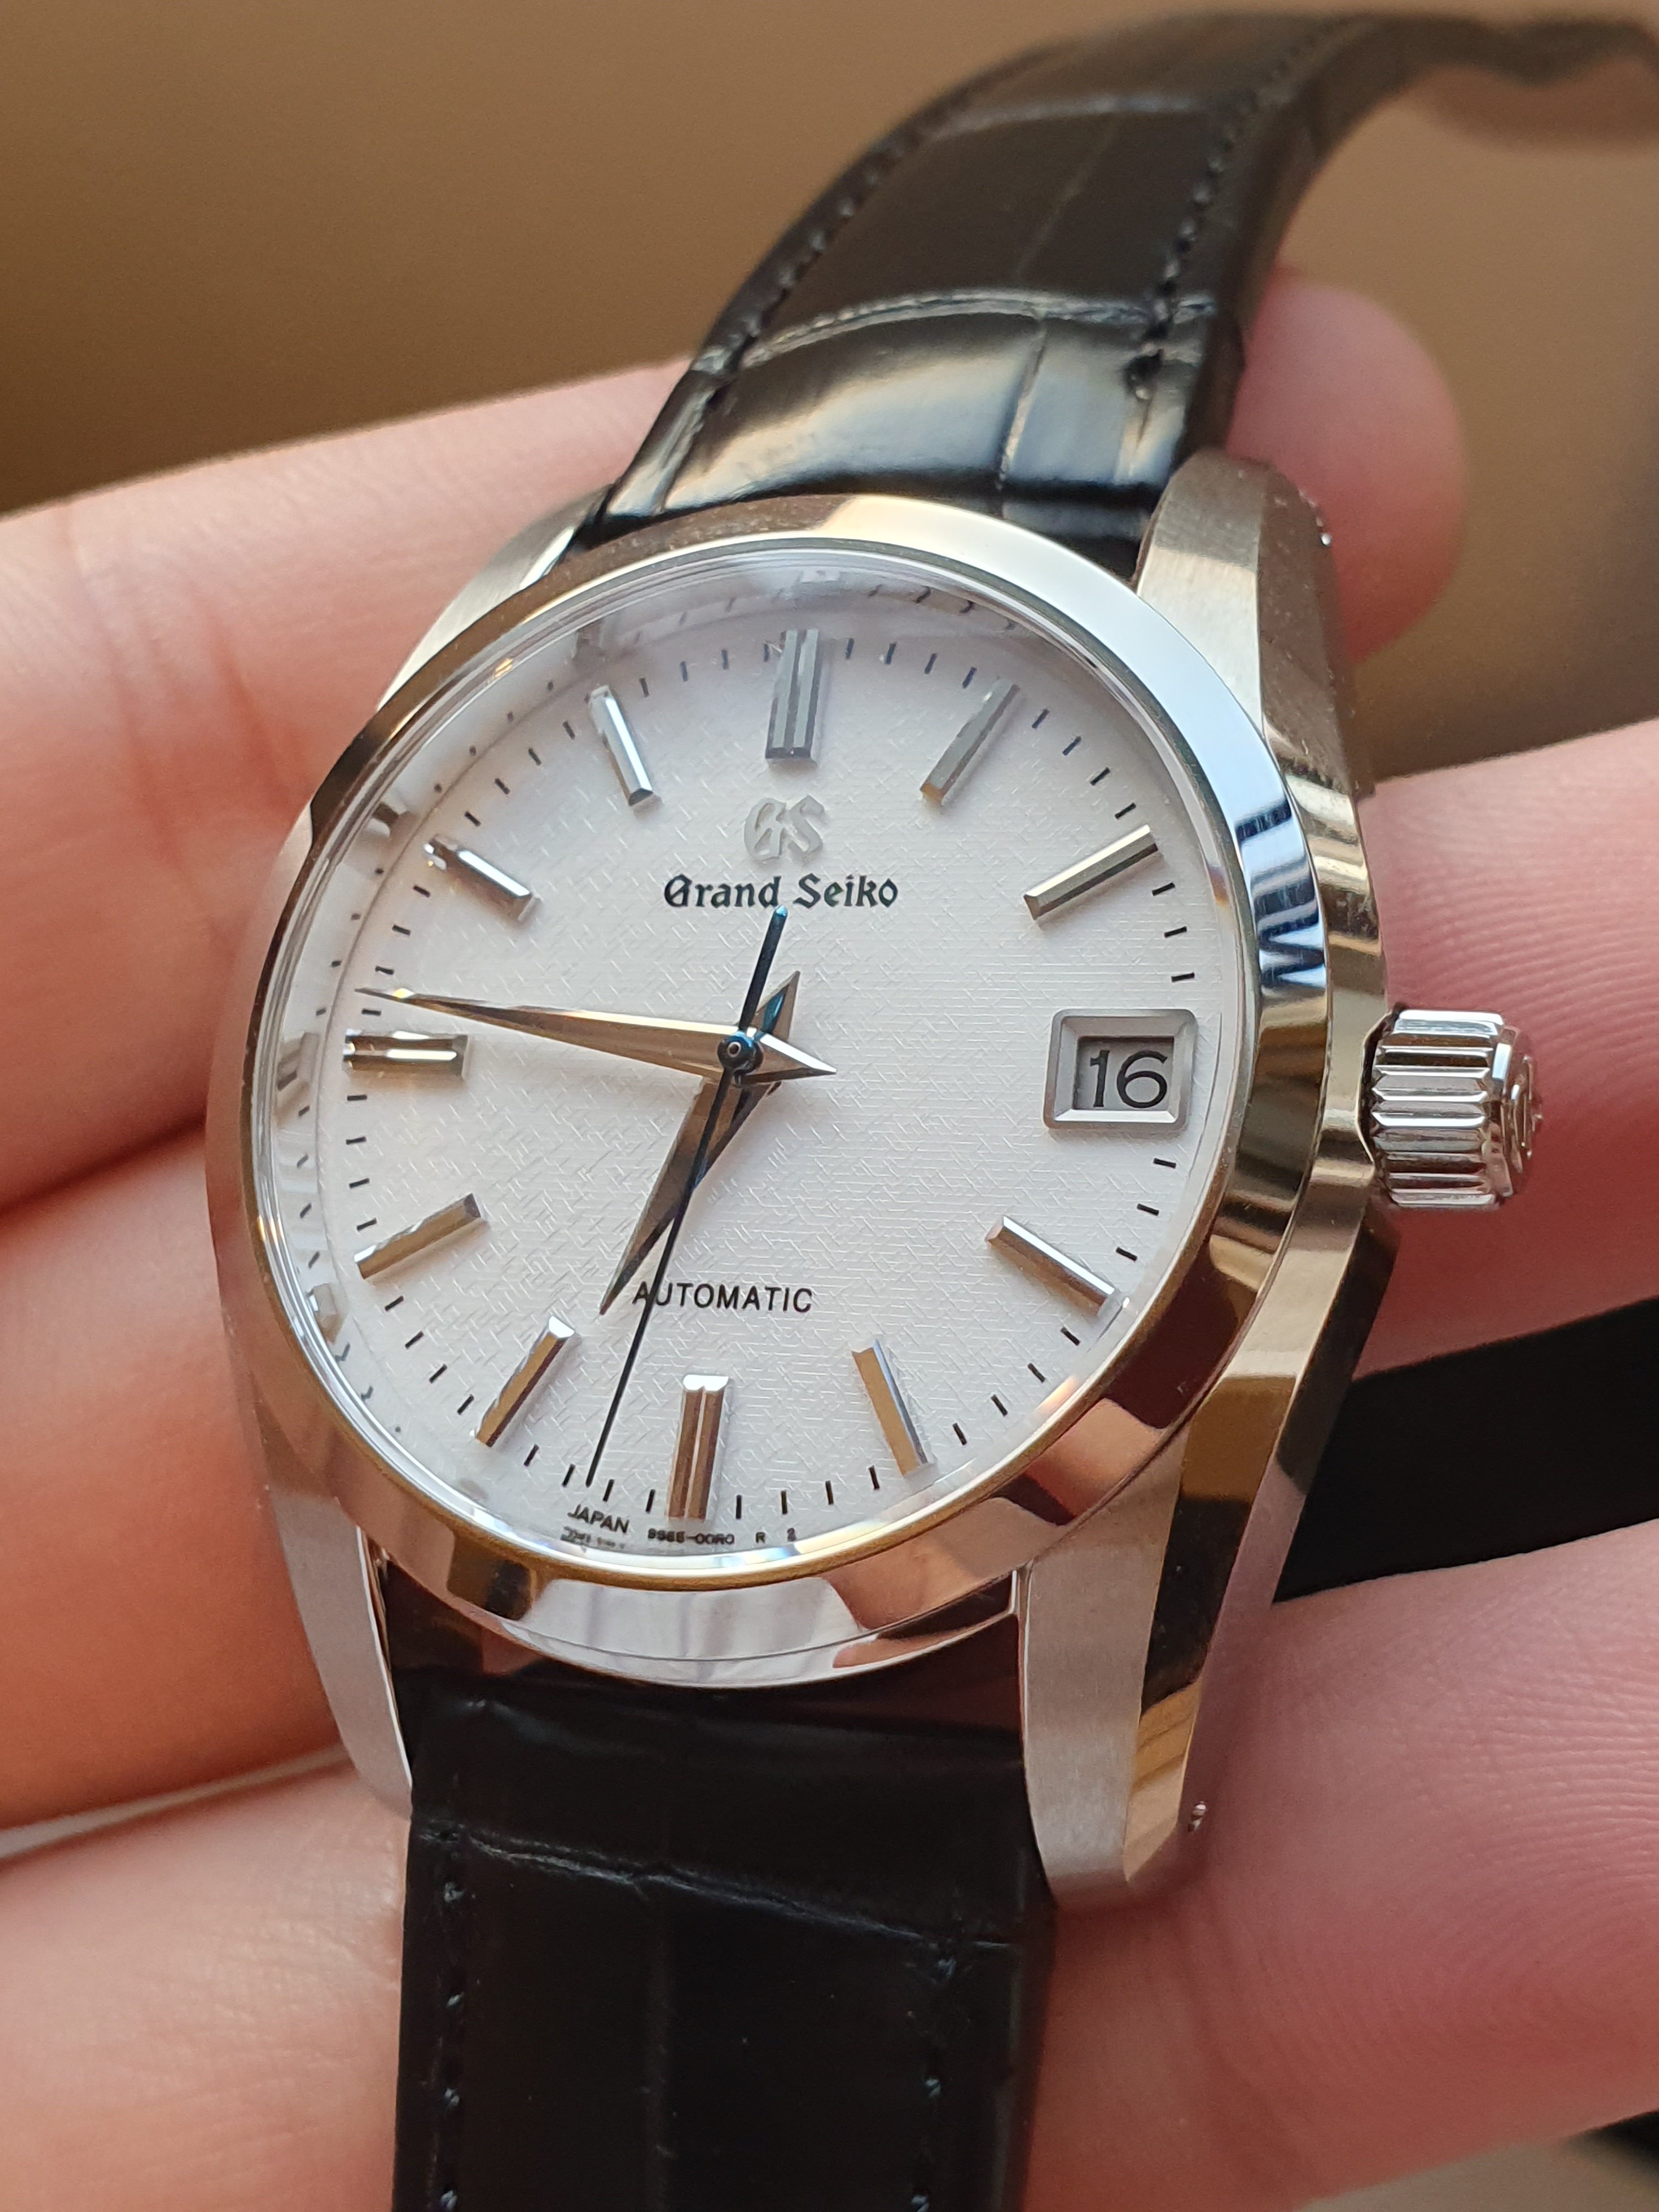 Is Grand Seiko getting better? | Page 11 | Omega Forums